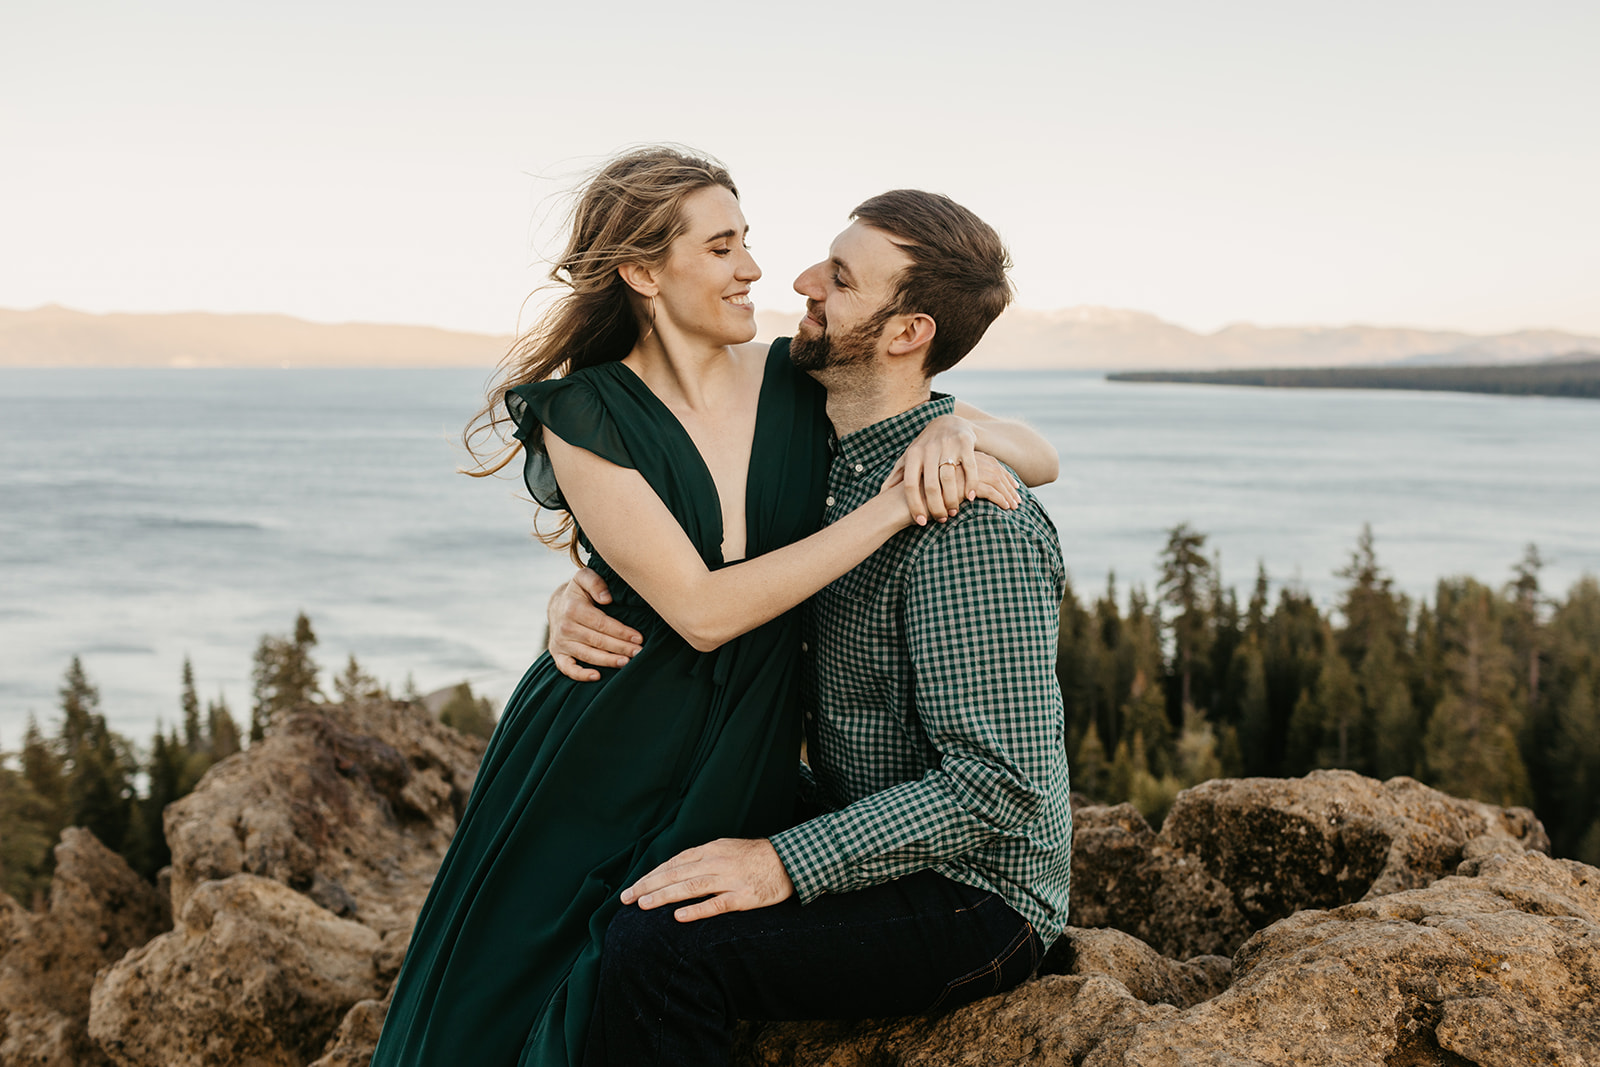 This inspiration for a North Lake Tahoe Engagement Session was captured by Dani Rawson Photography | A Lake Tahoe Photographer